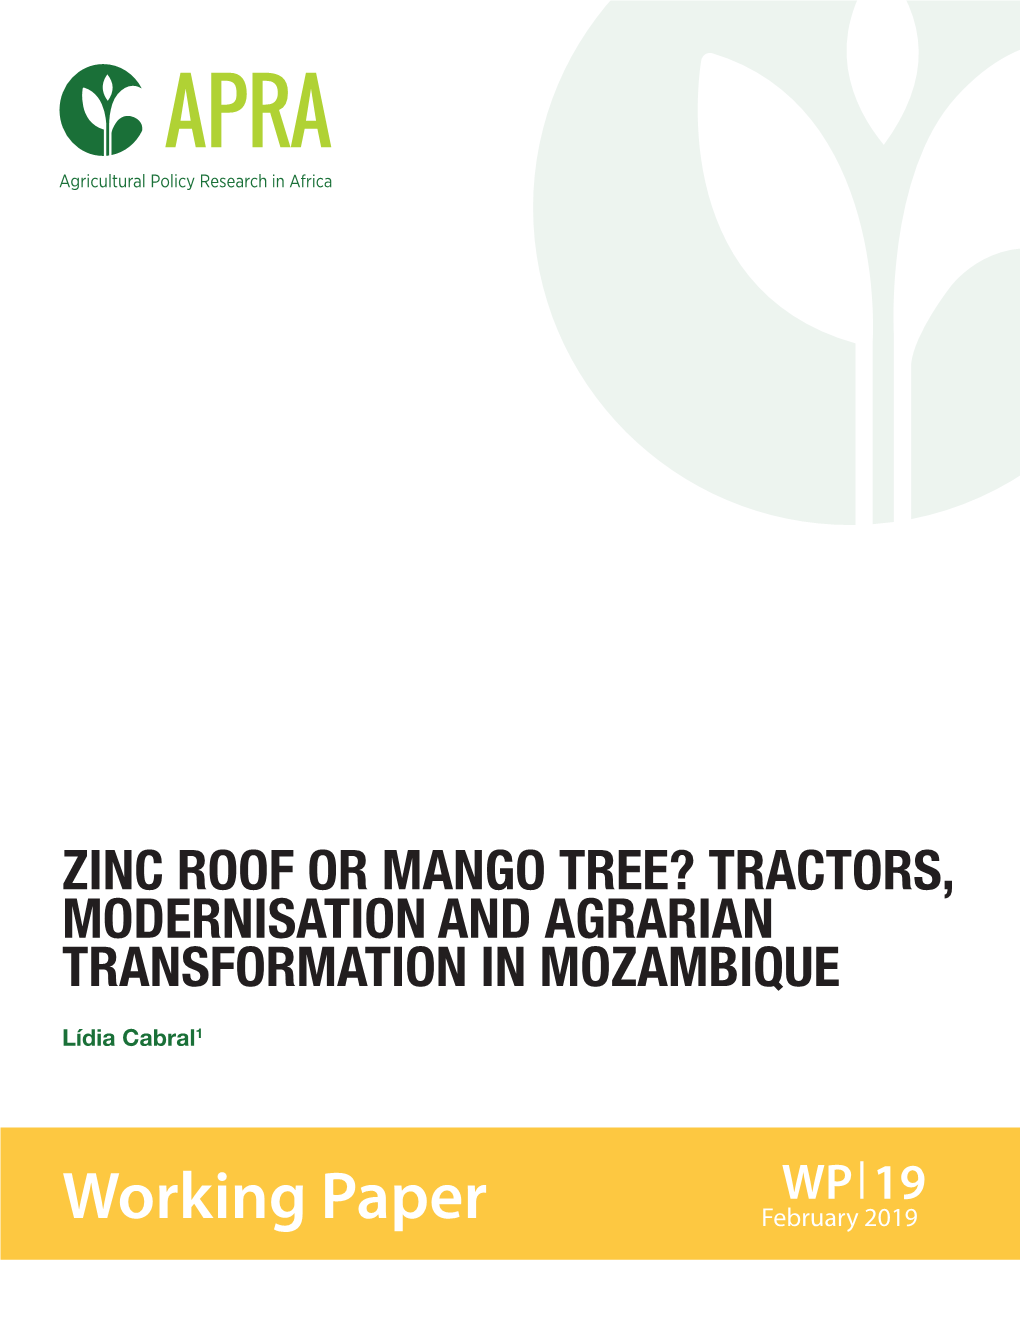 Tractors, Modernisation and Agrarian Transformation in Mozambique